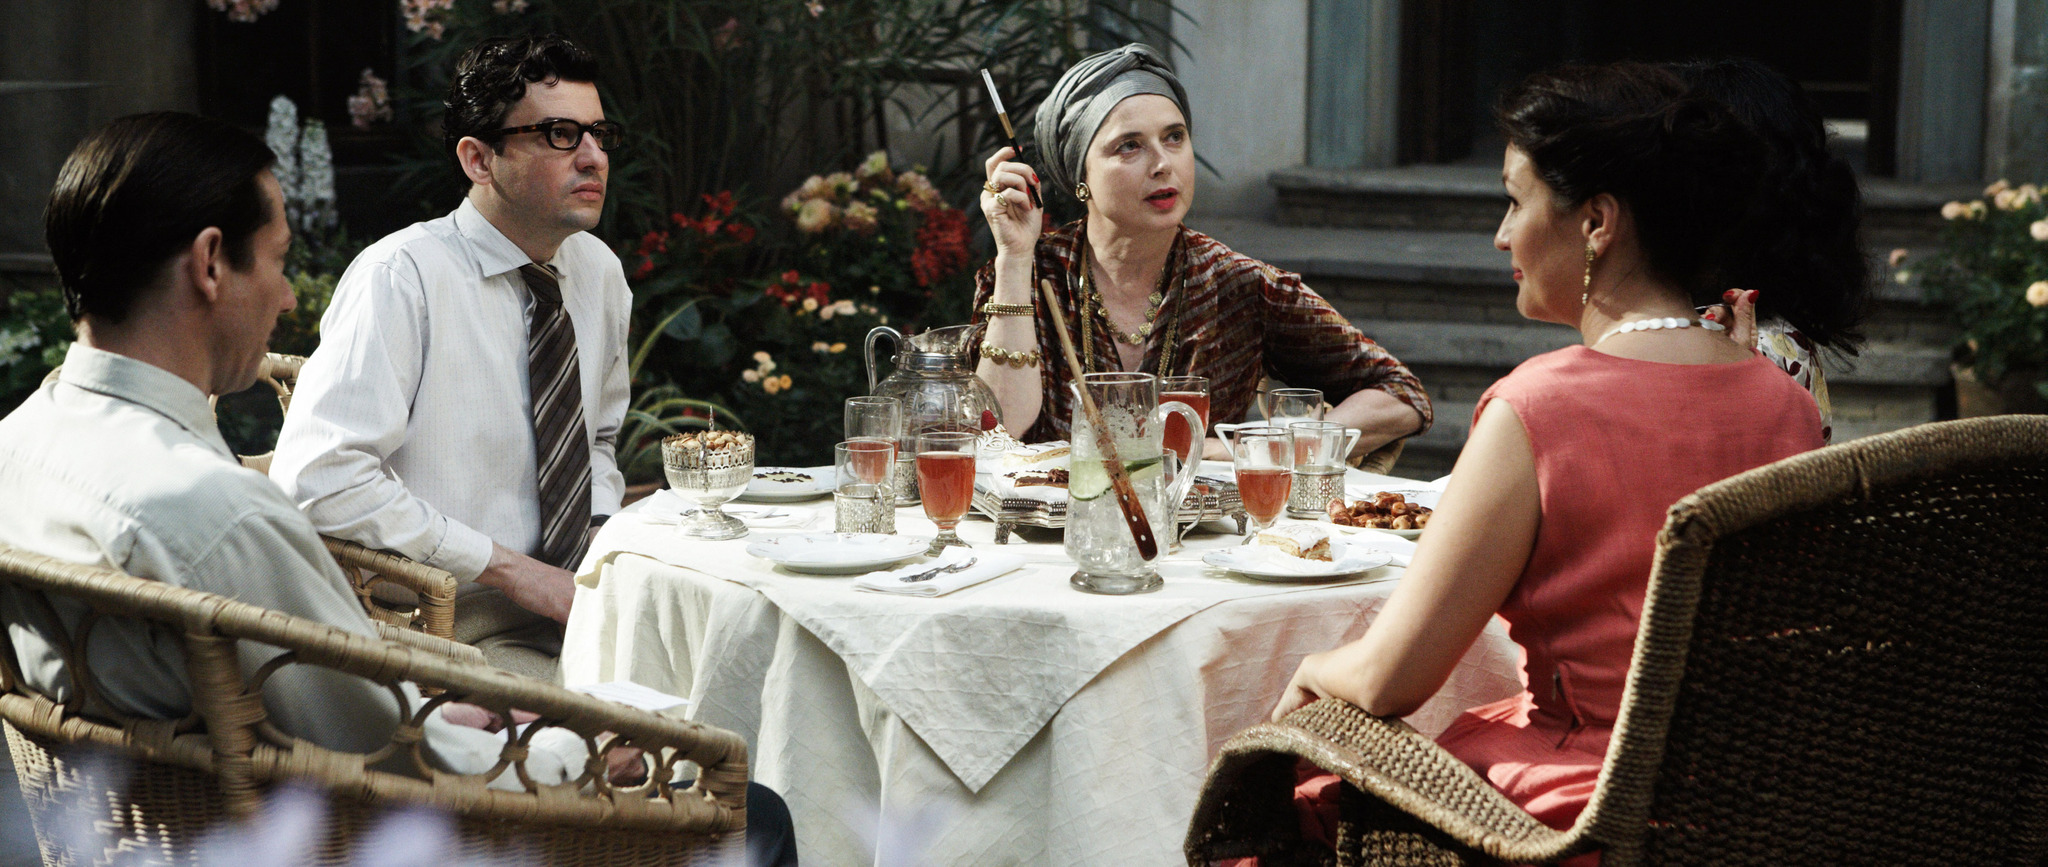 Still of Isabella Rossellini, Éric Caravaca and Rona Hartner in Poulet aux prunes (2011)